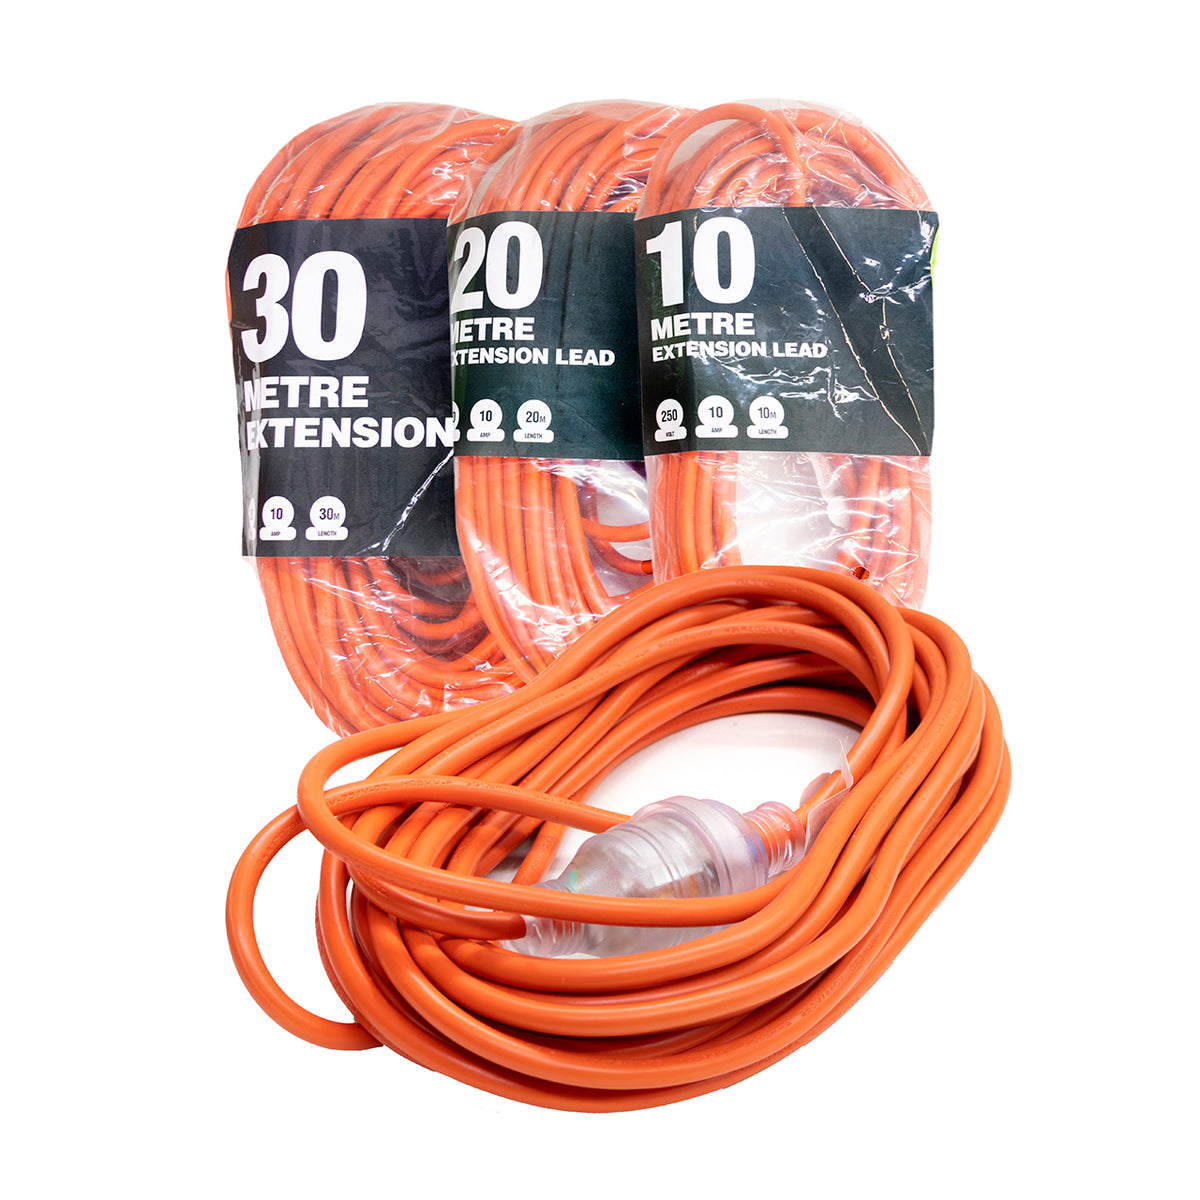 Electrical Leads